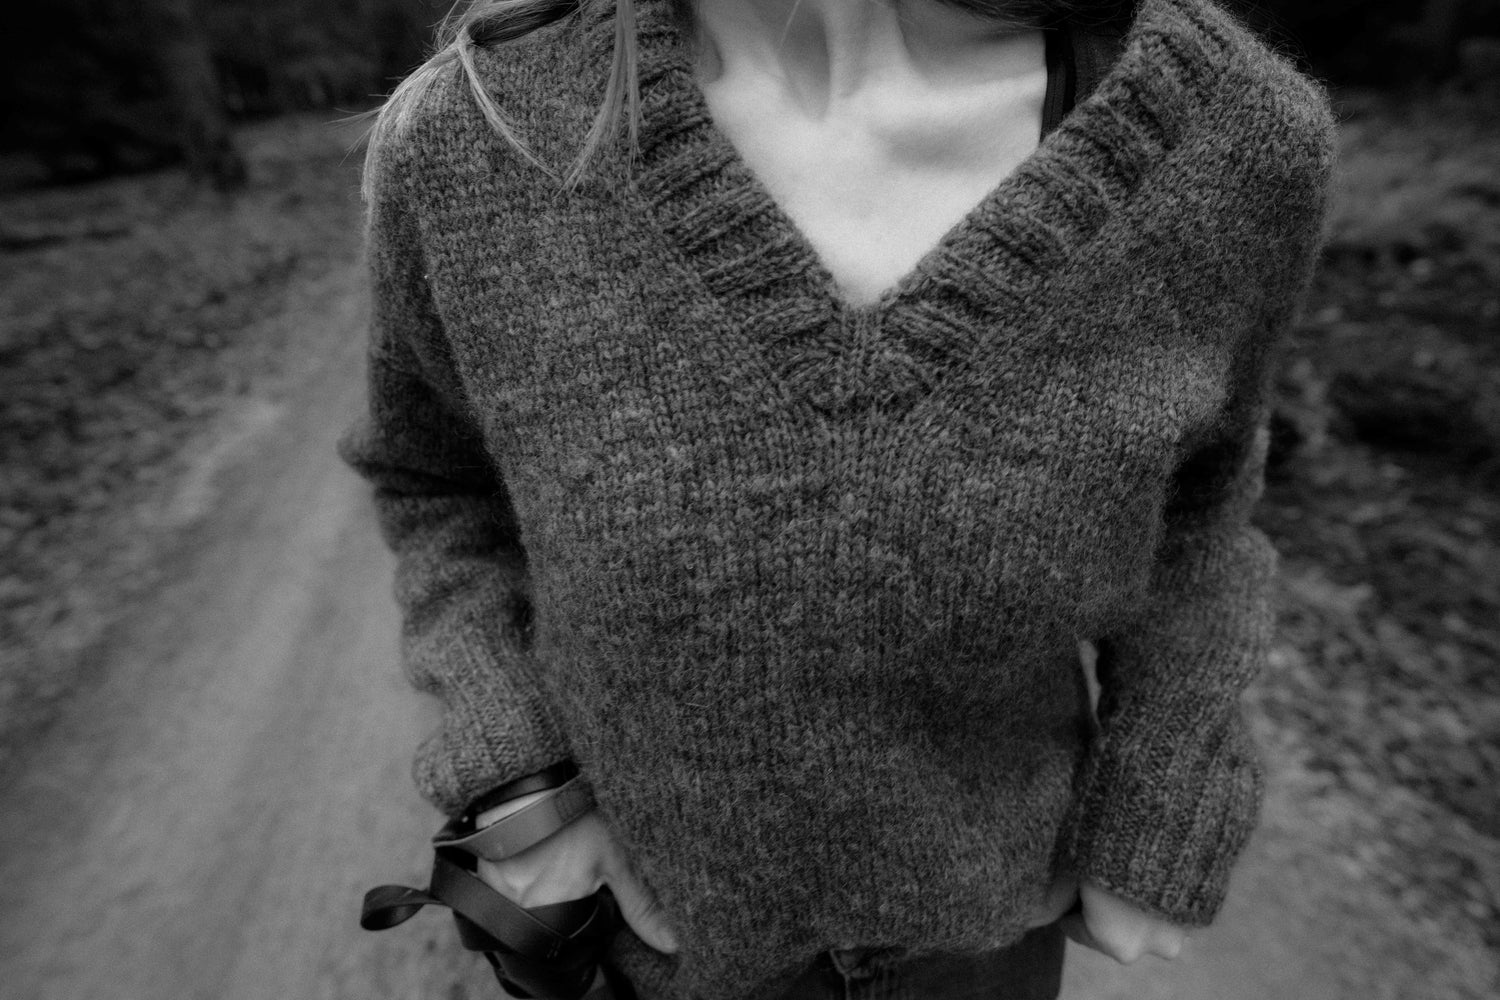 A black and white close-up photo of a person wearing a cozy, hand-knitted V-neck sweater design 'Chloe Sweater'. The sweater, knit in Nutiden unspun yarn, is a modified drop shoulder design with long sleeves.